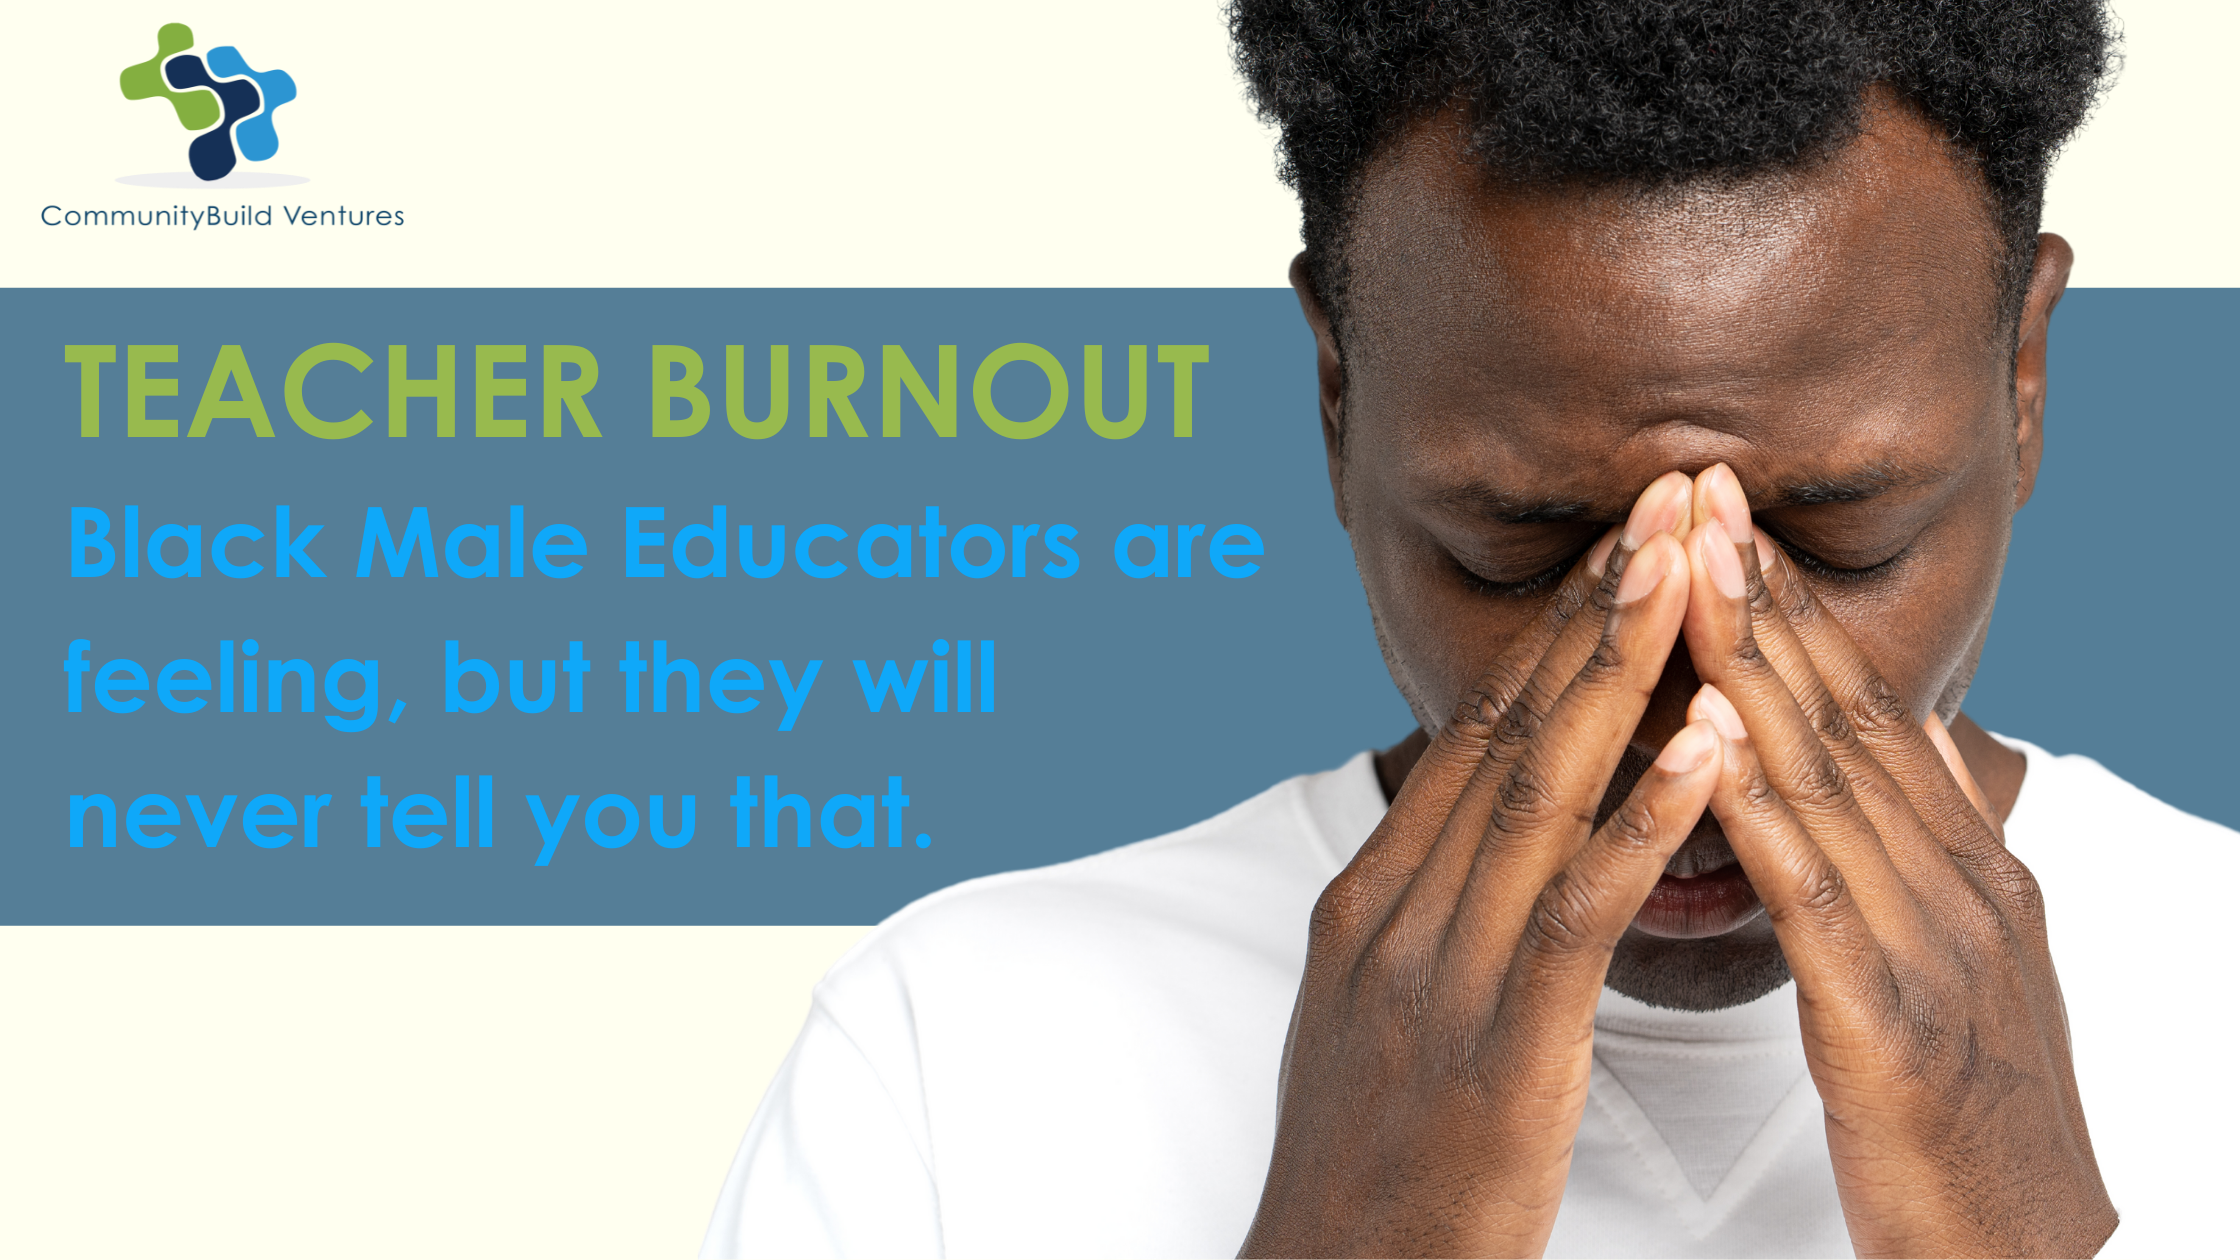 Teacher Burnout – Black Male Educators are feeling, but they will never tell you that.